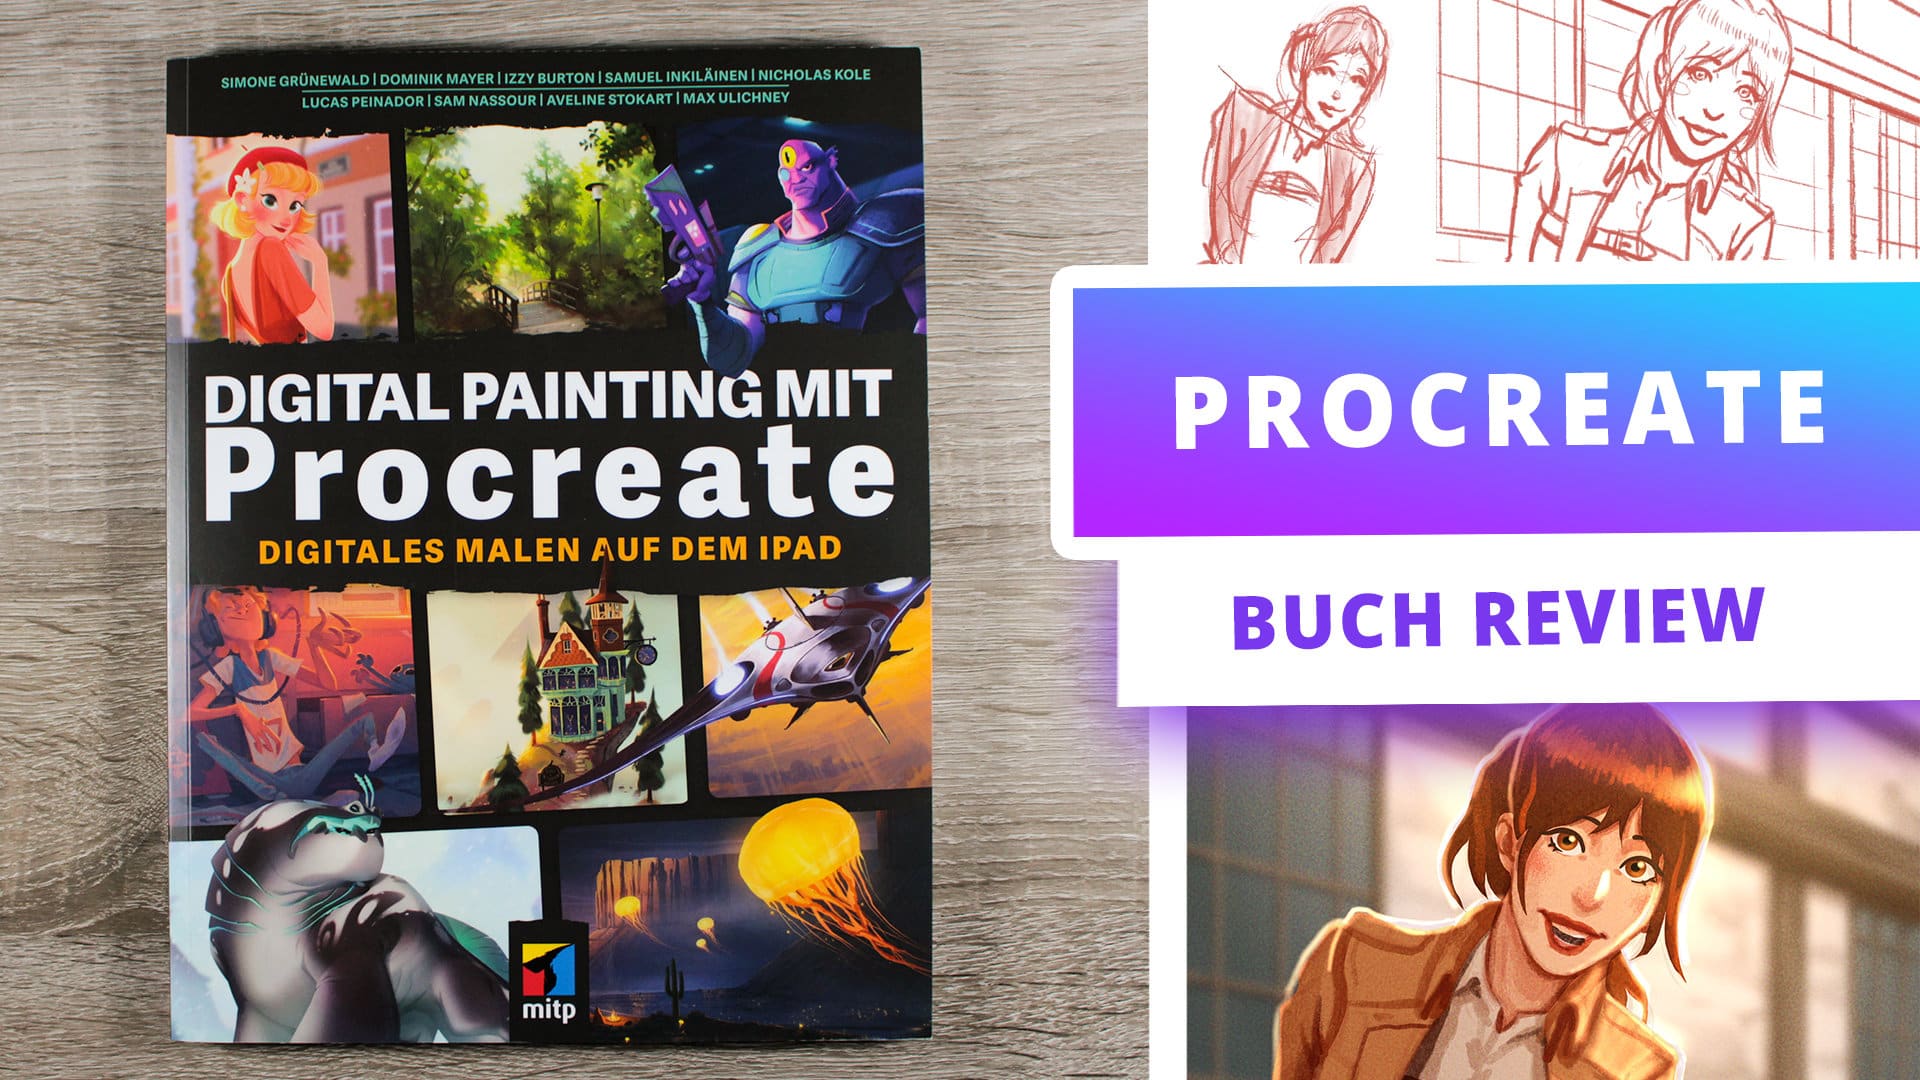 Digital Painting mit Procreate [Buch Review]